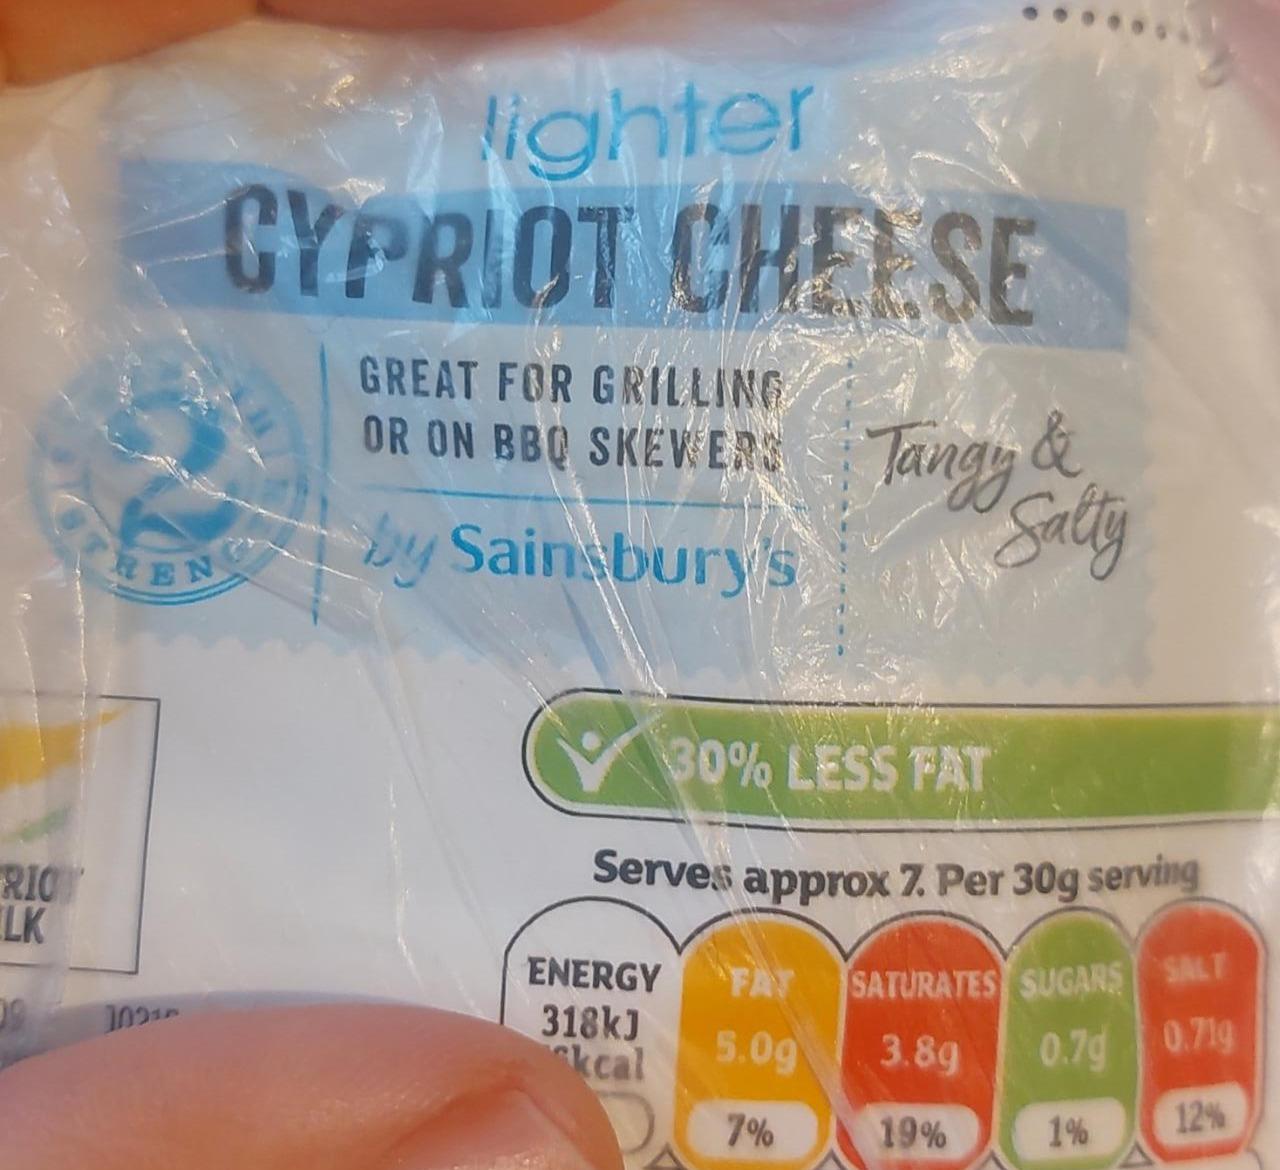 Fotografie - Lighter Cypriot Cheese by Sainsbury's